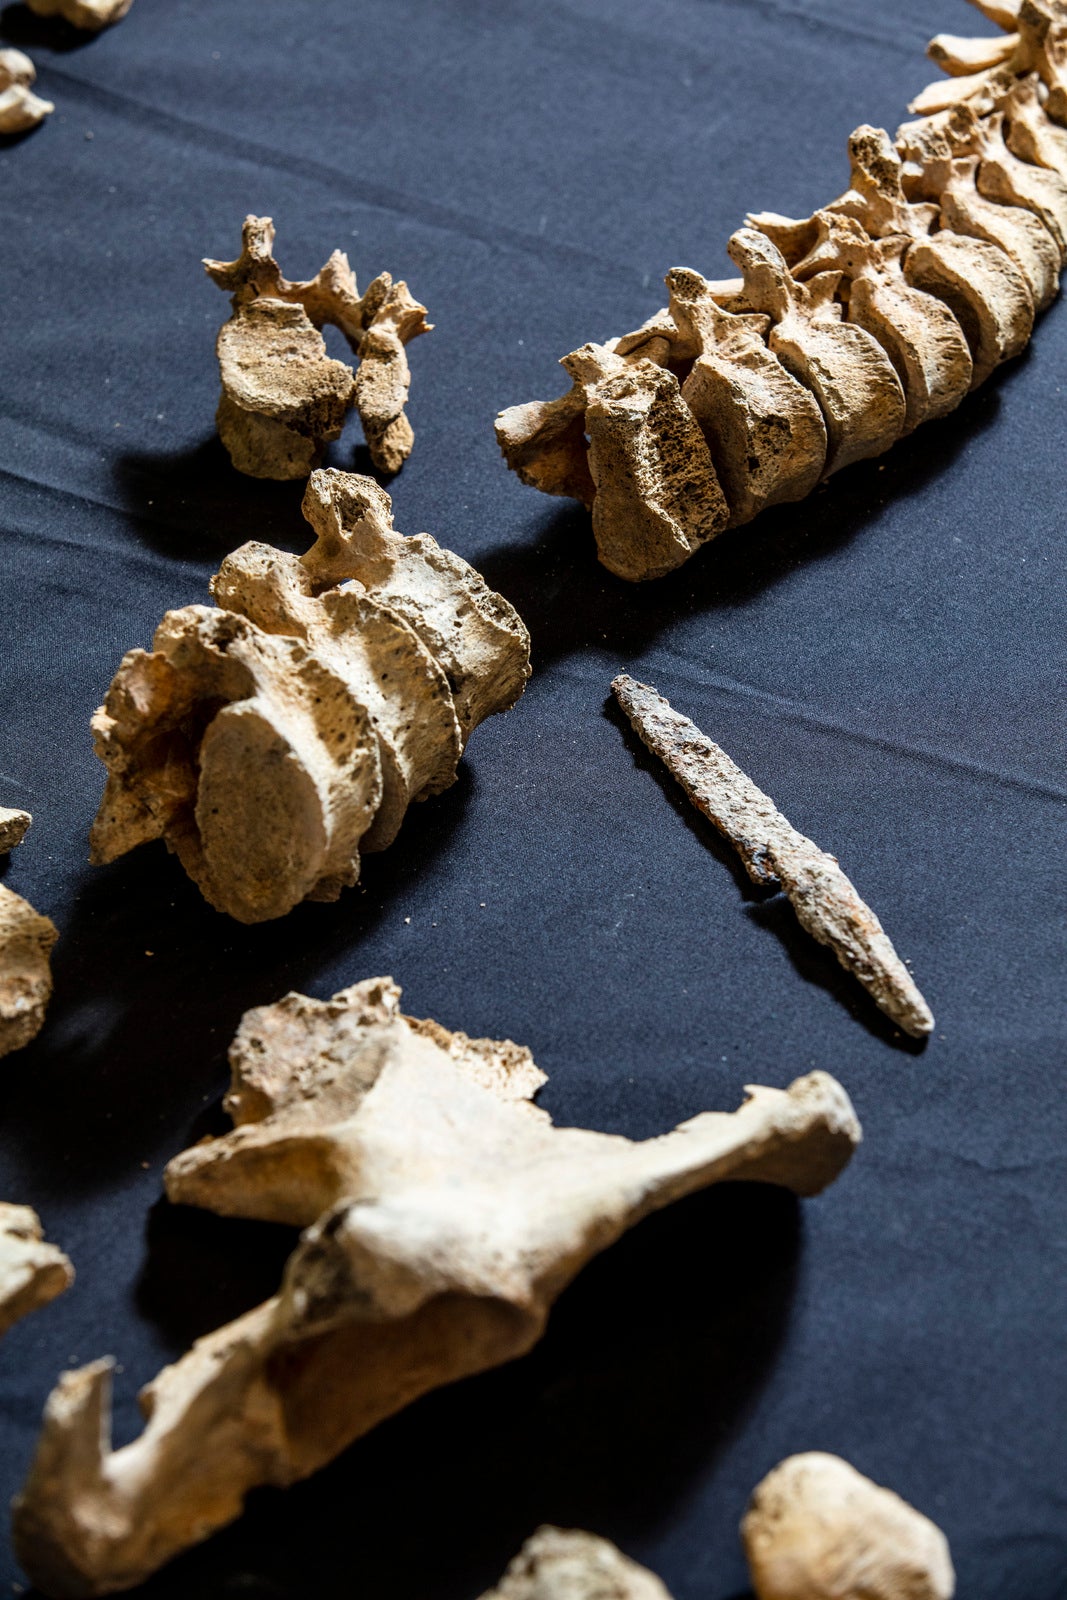 A skeleton, thought to be male, was found with a sharp iron object embedded into its spine